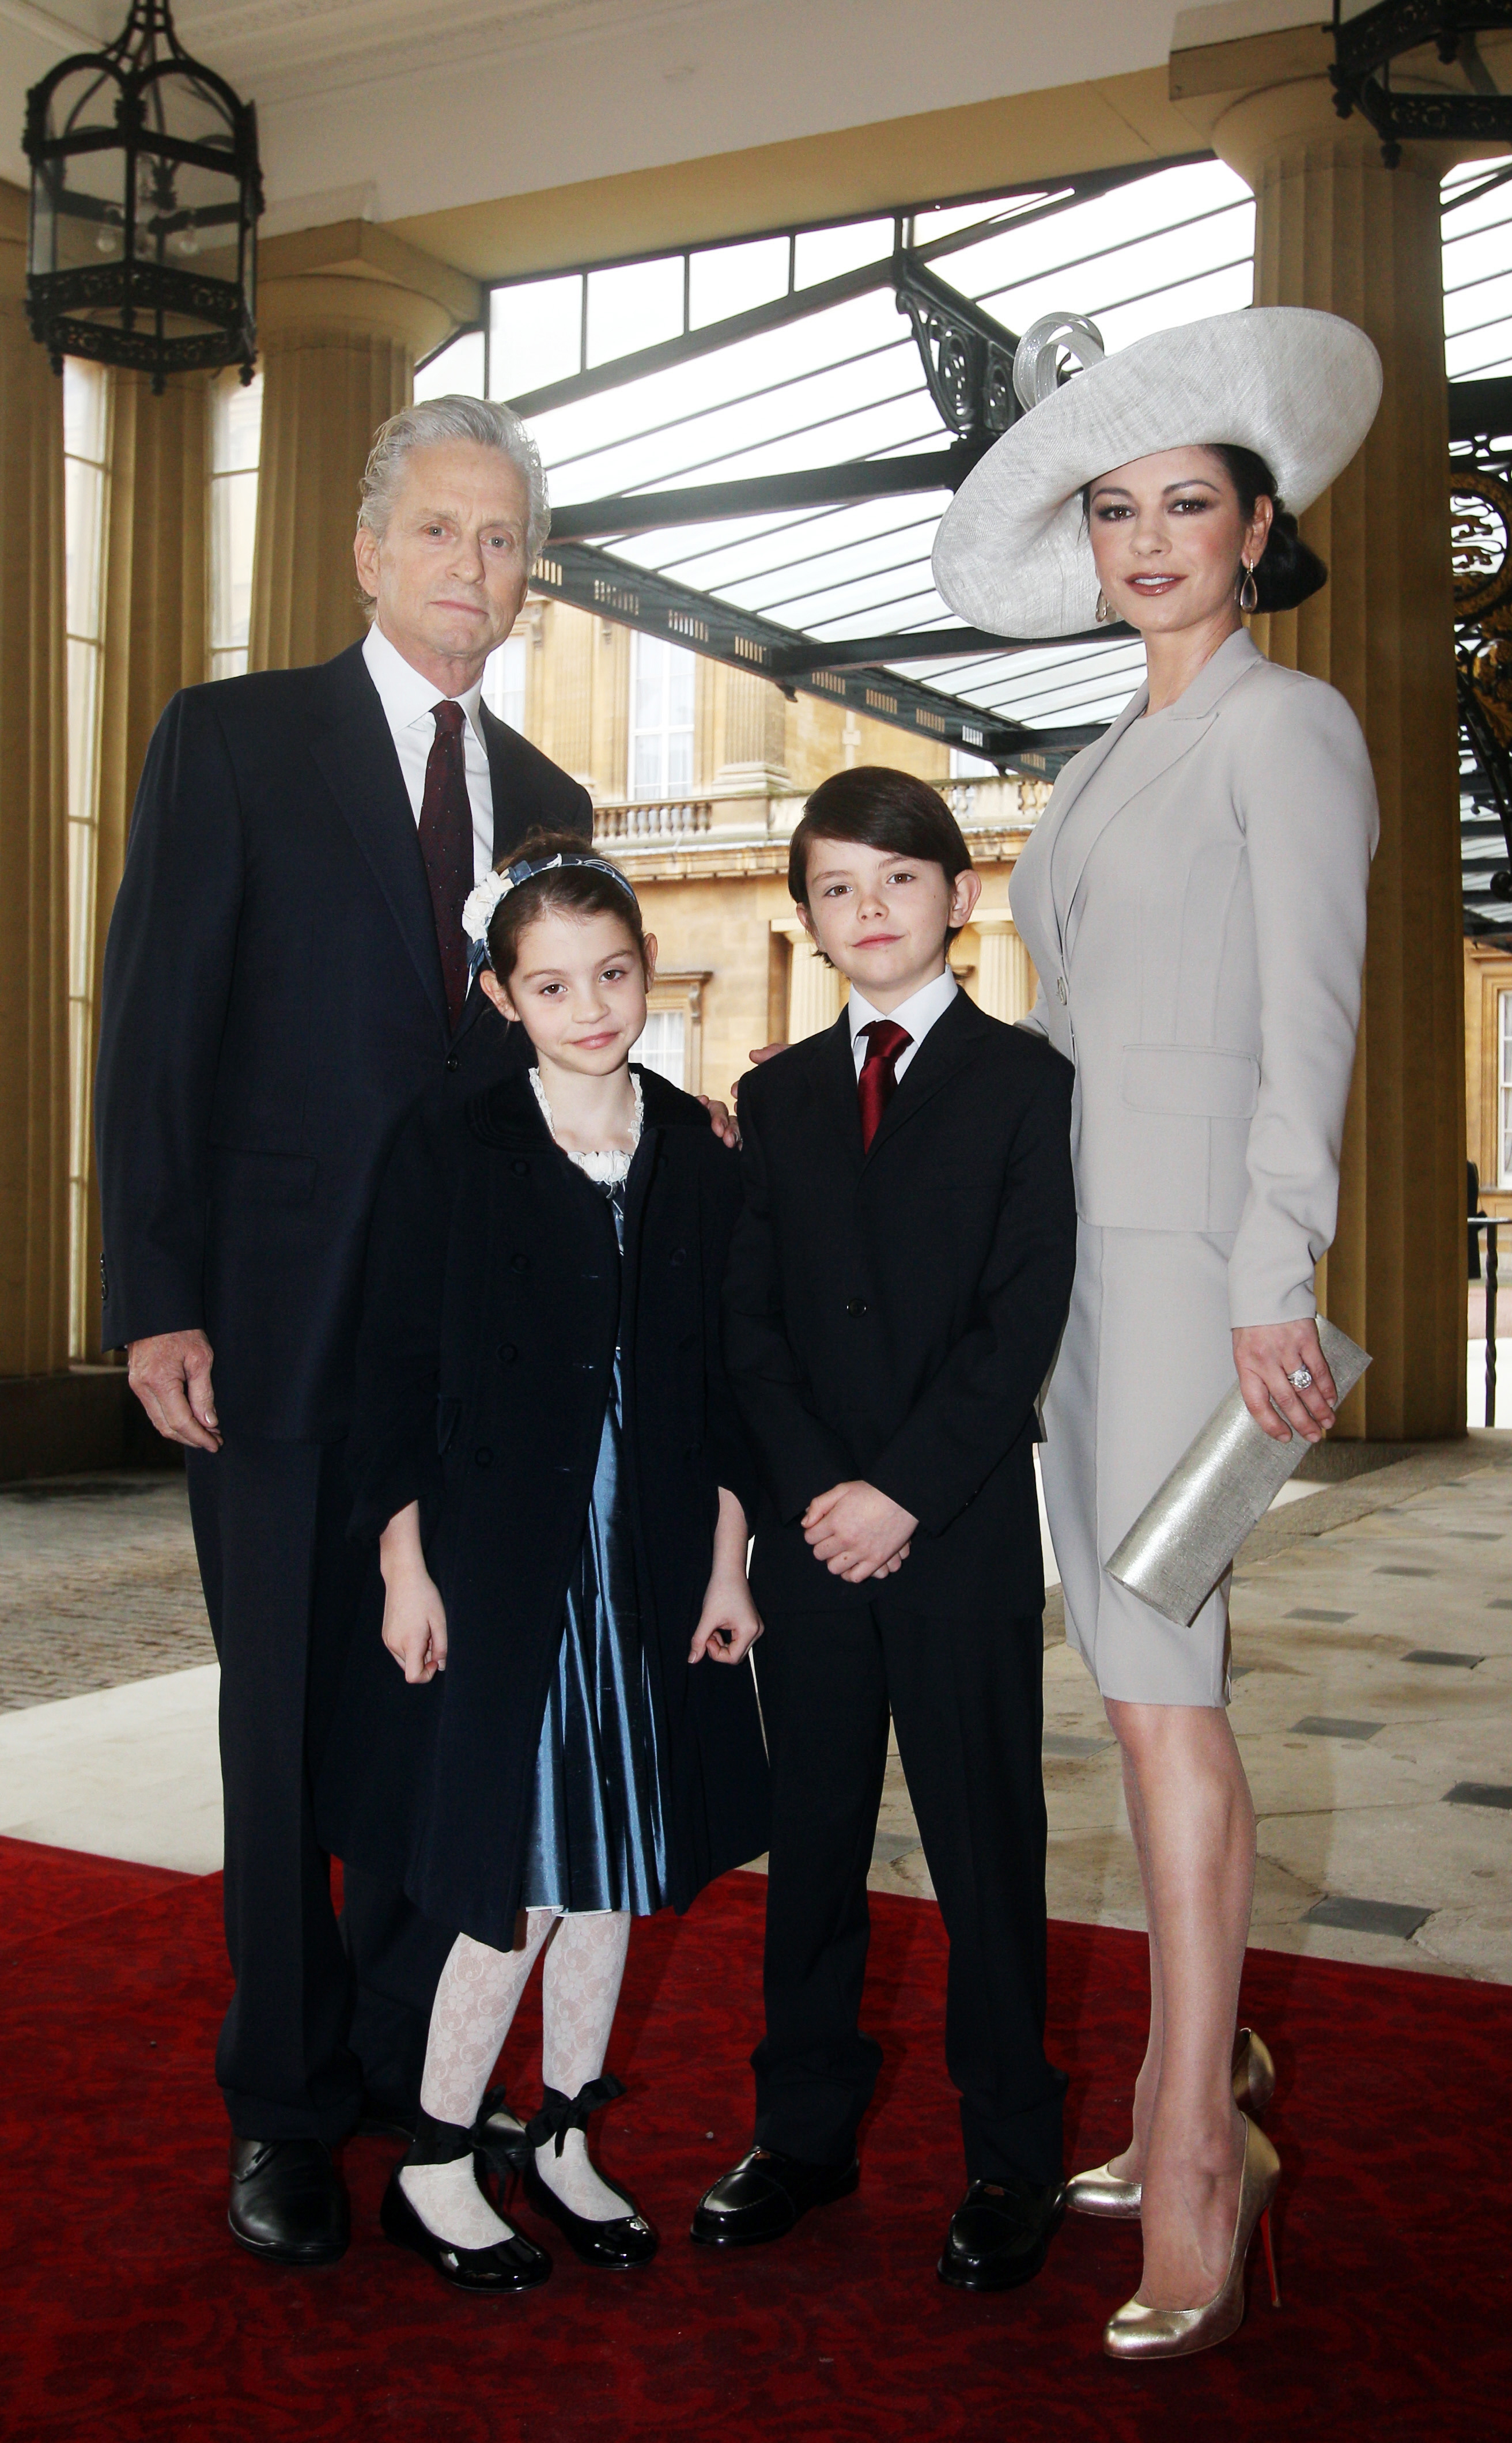 Catherine Zeta-Jones, Michael Douglas and their children Dylan and Carys at Buckingham Palace  on February 24, 2011. | Source: Getty Images